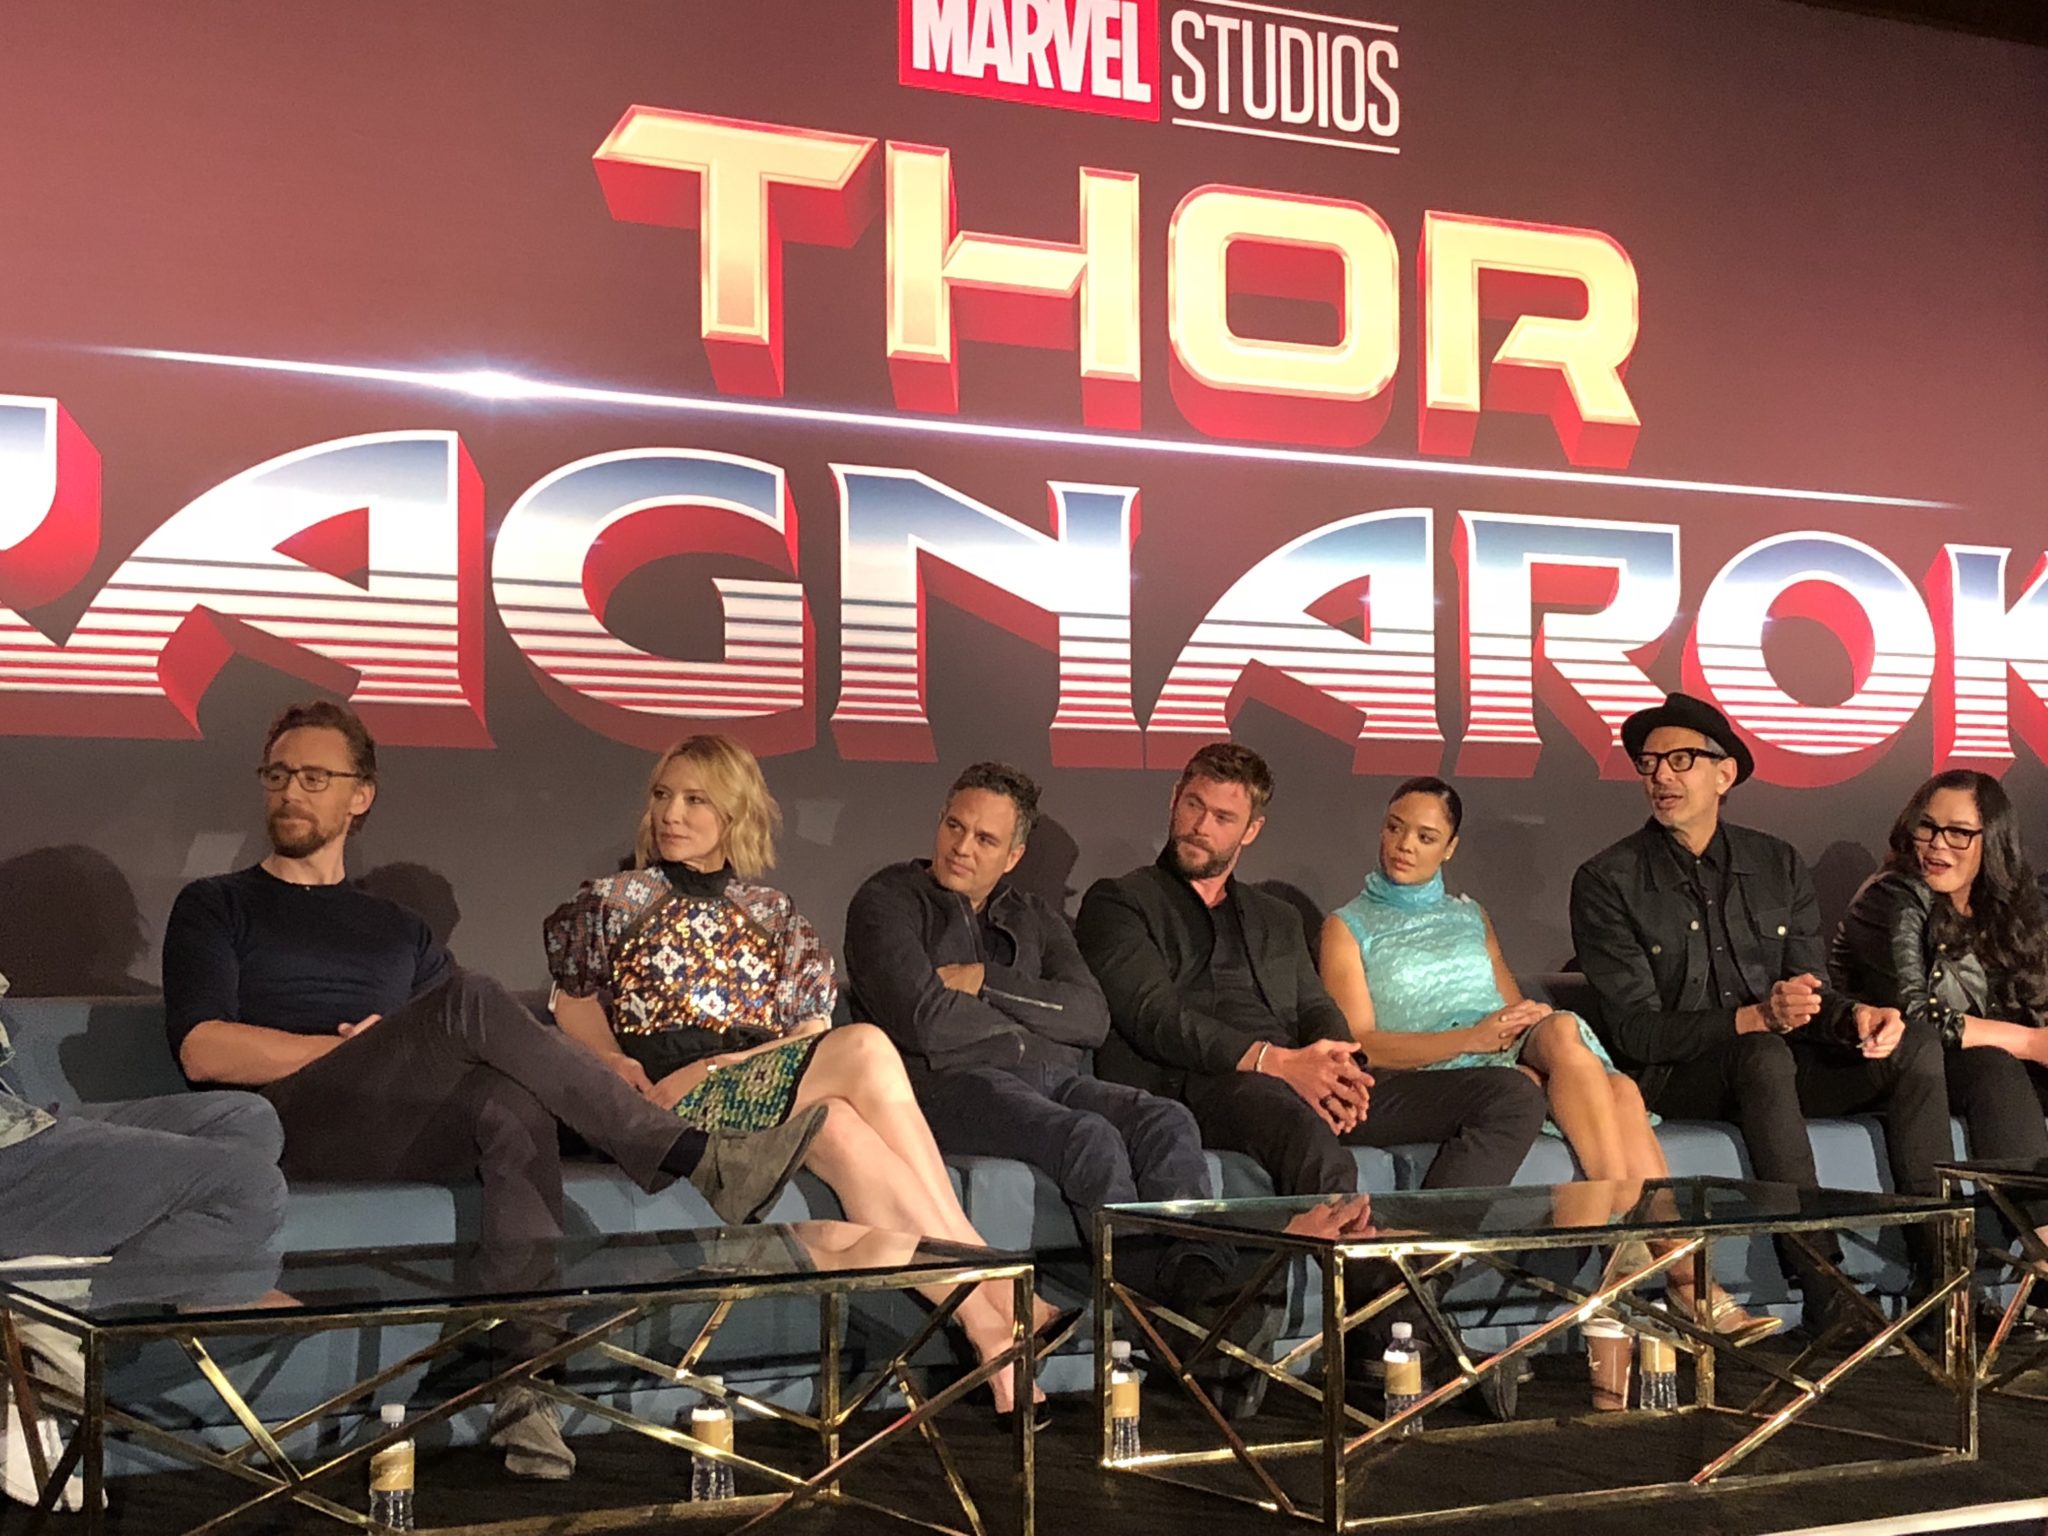 A Chat with the Cast & Crew of Marvel's Thor: Ragnarok